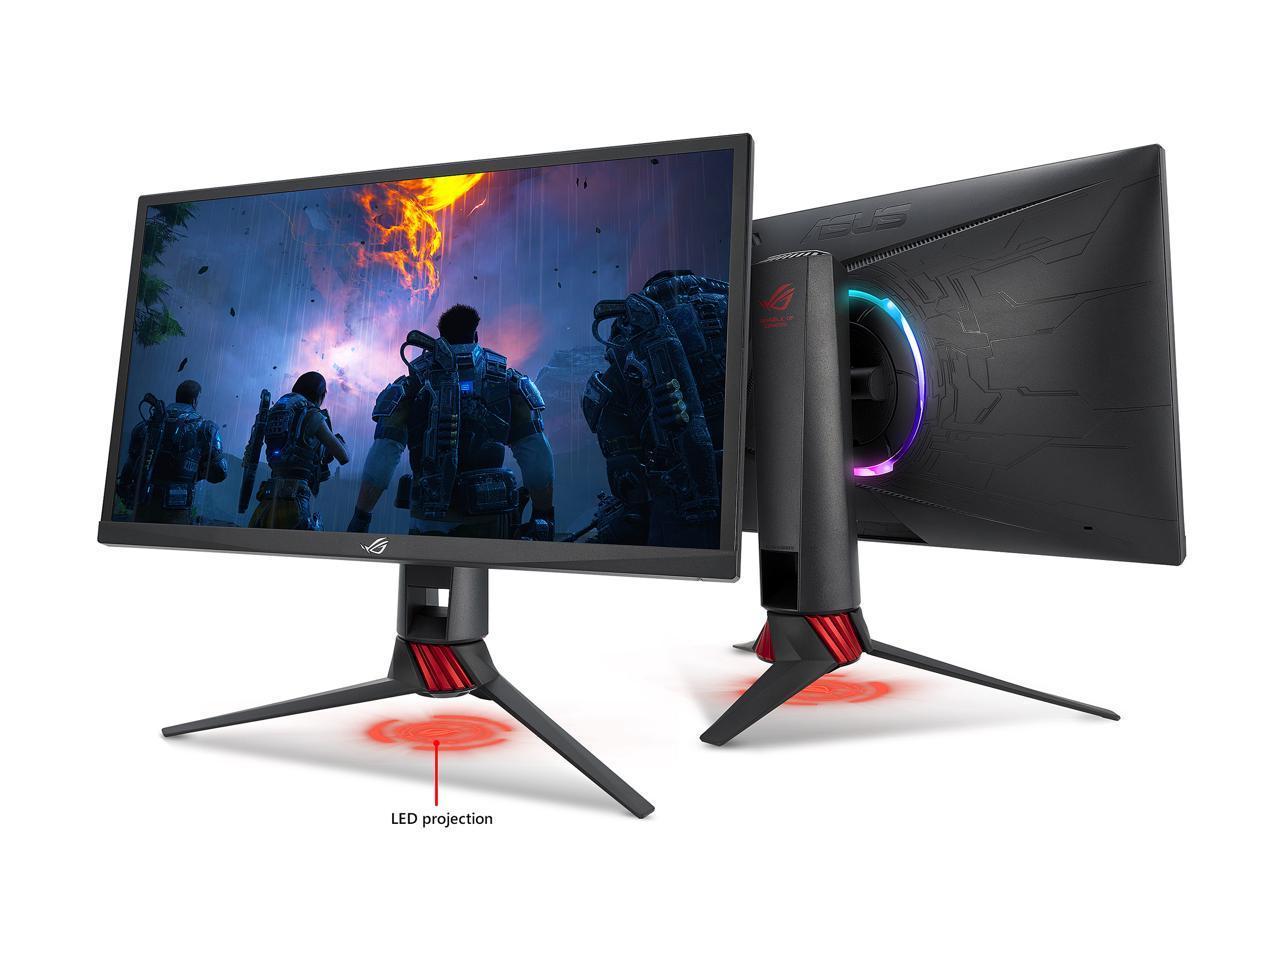 ASUS 23.8" Full HD 1920 X 1080 ROG Strix 1080p 240Hz 1ms Eye Care G-SYNC compatible FreeSync Esports Gaming Monitor with DP dual HDMI